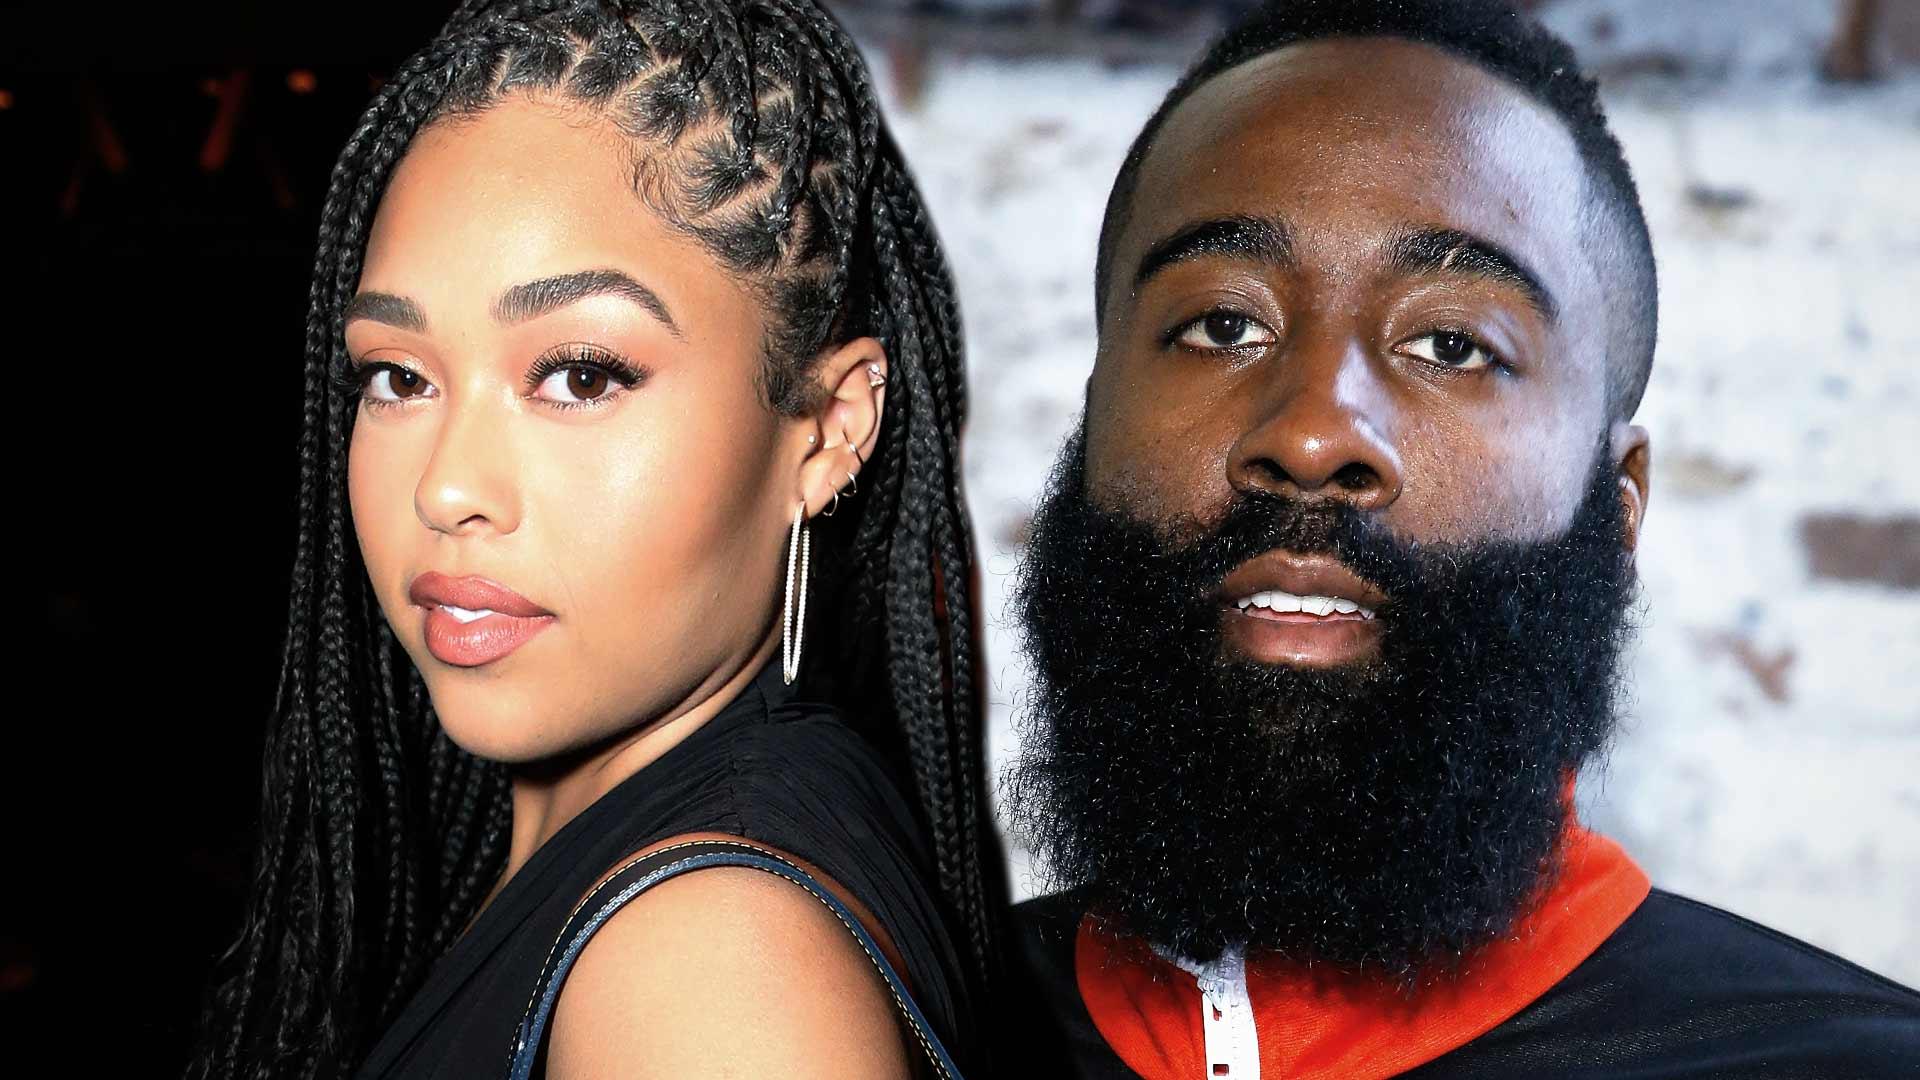 Jordyn Woods Dancing & Hanging Out With Khloé’s Other Ex, James Harden